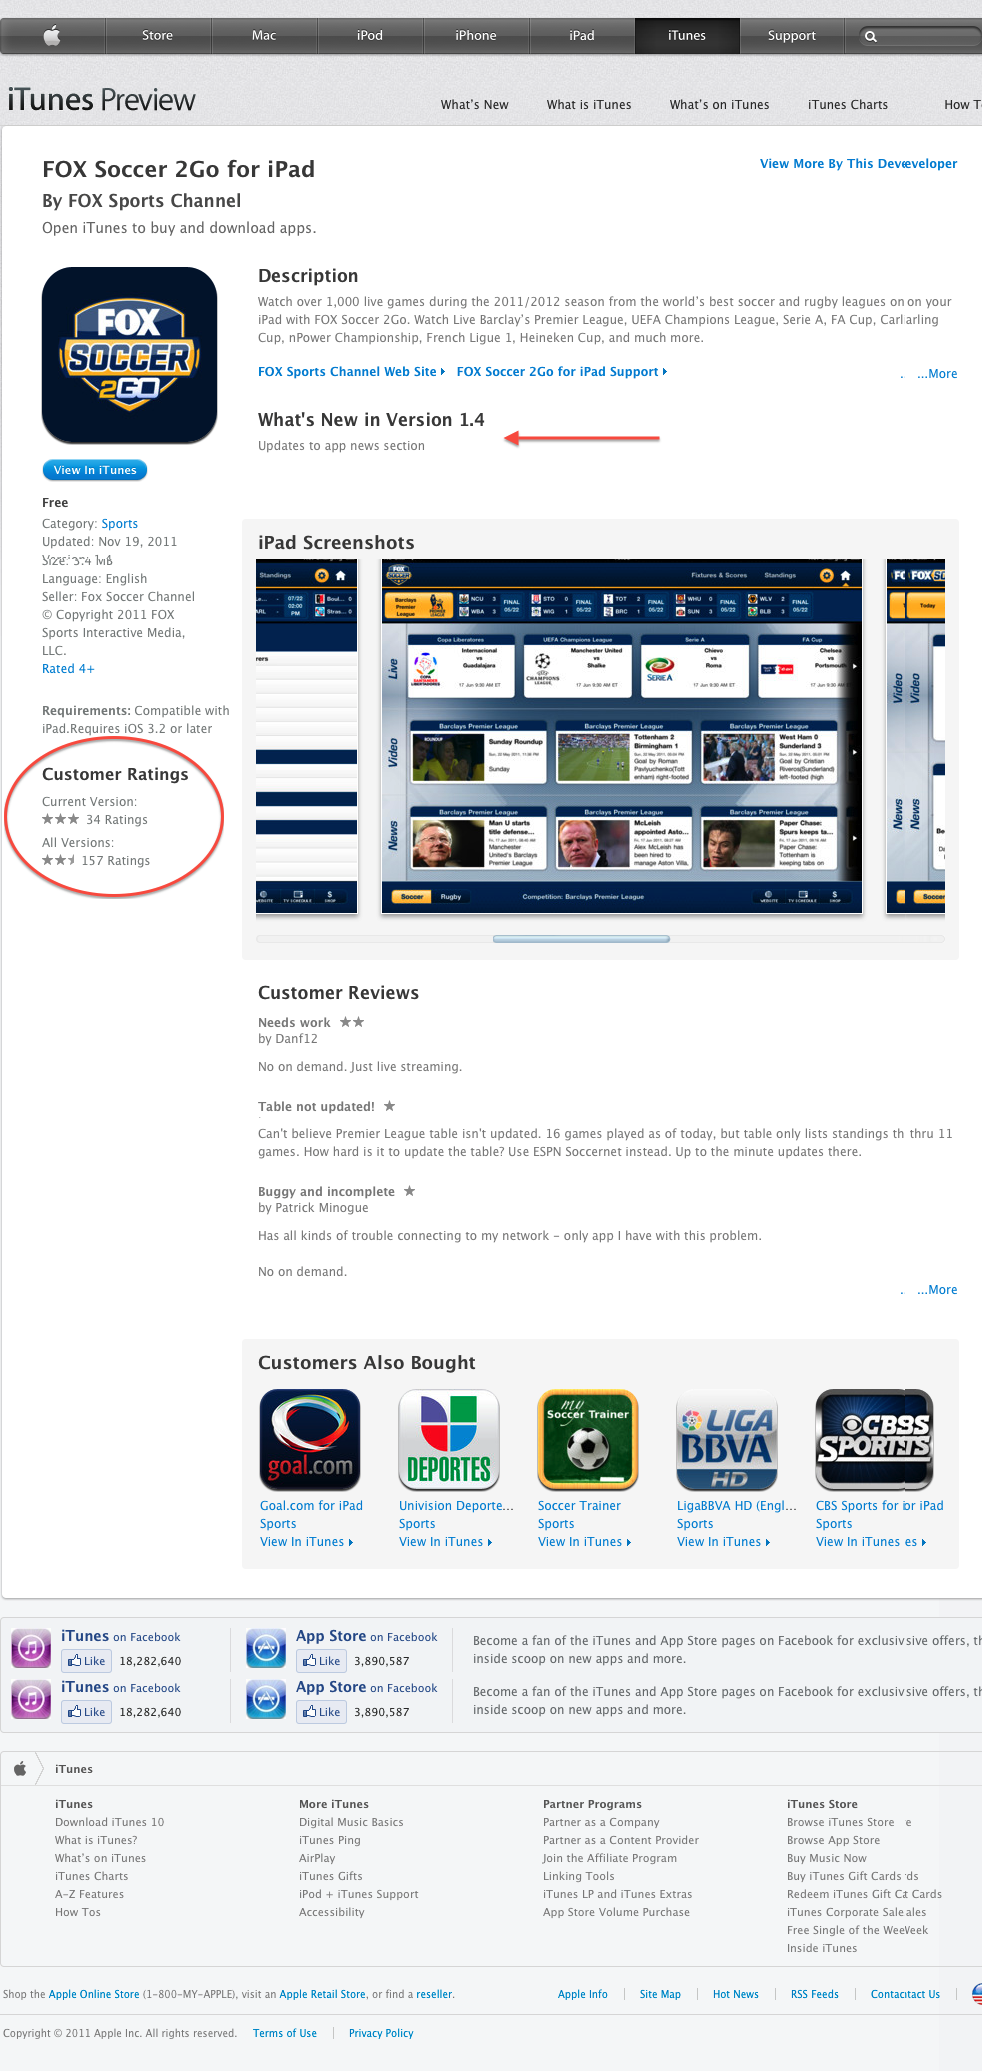 FOX Soccer 2Go for iPad for iPad on the iTunes App Store